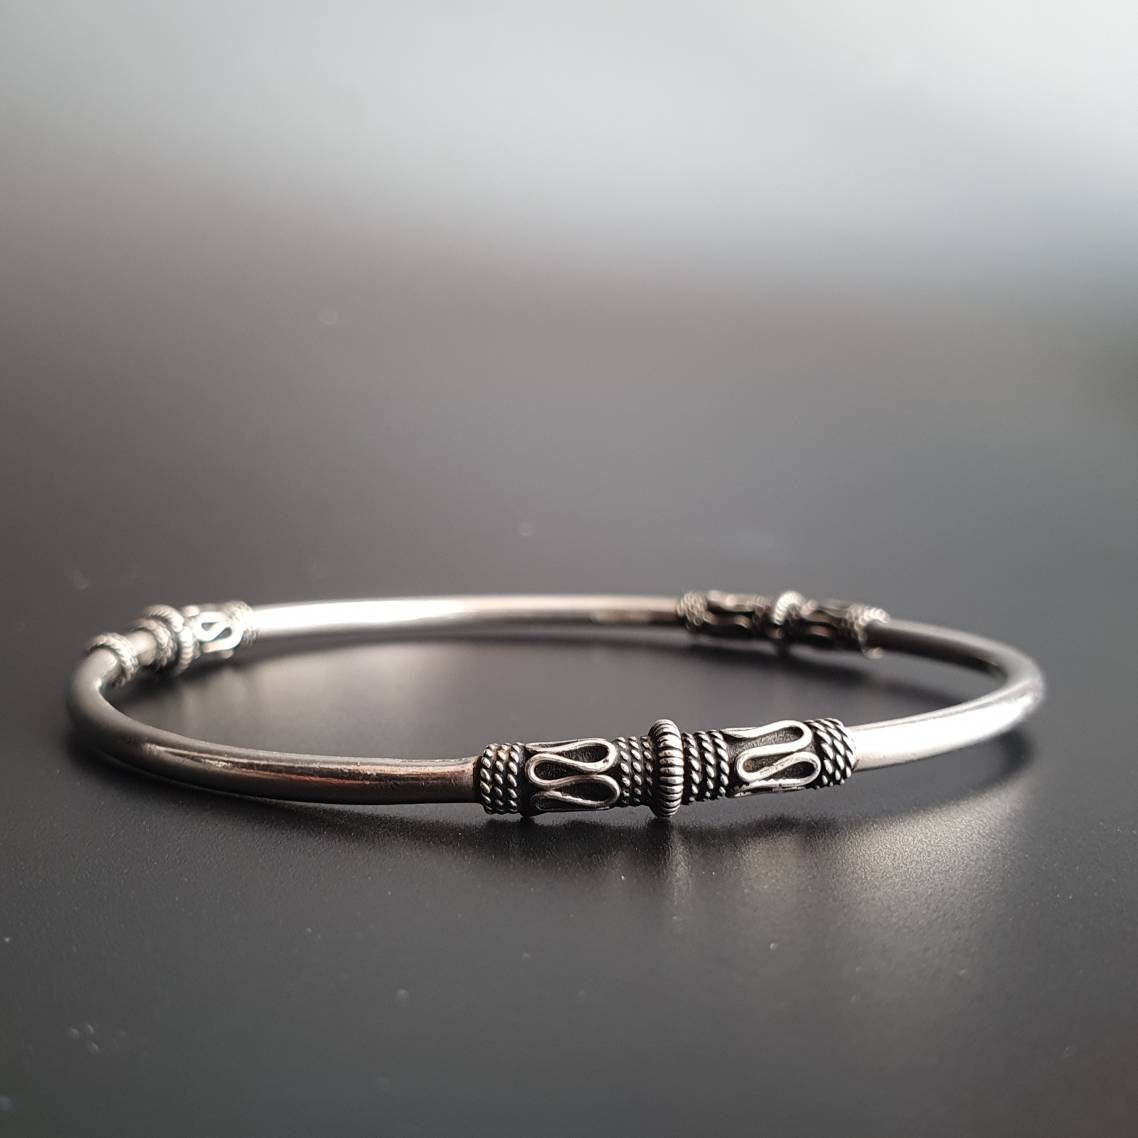 Bangle, bracelet, sterling silver, suarti,indi, stackable,gifts, silver bangles,925, bohemian, gypsy style